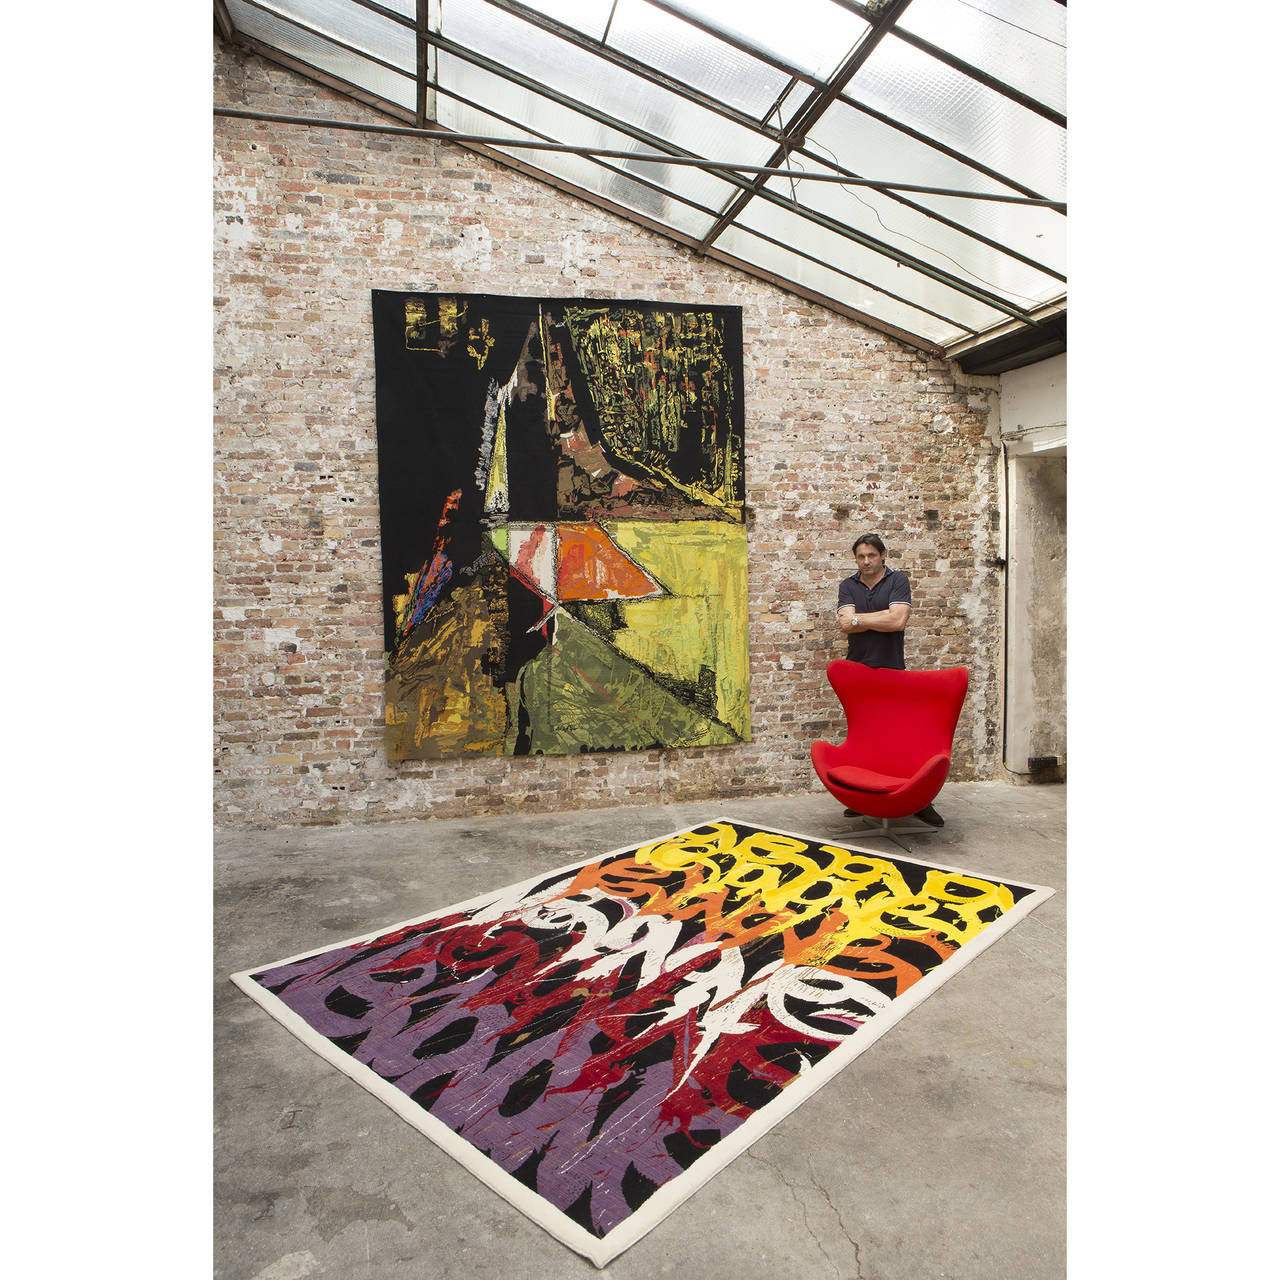 It is a rare signed and numbered rug designed by the famous street artist JonOne, and handwoven in Boccara's manufacture.

Dimensions: 300 x 200 cm.
Composition: Natural silk and wool, handwoven.
Edition: 8.

John Andrew Perello was born in